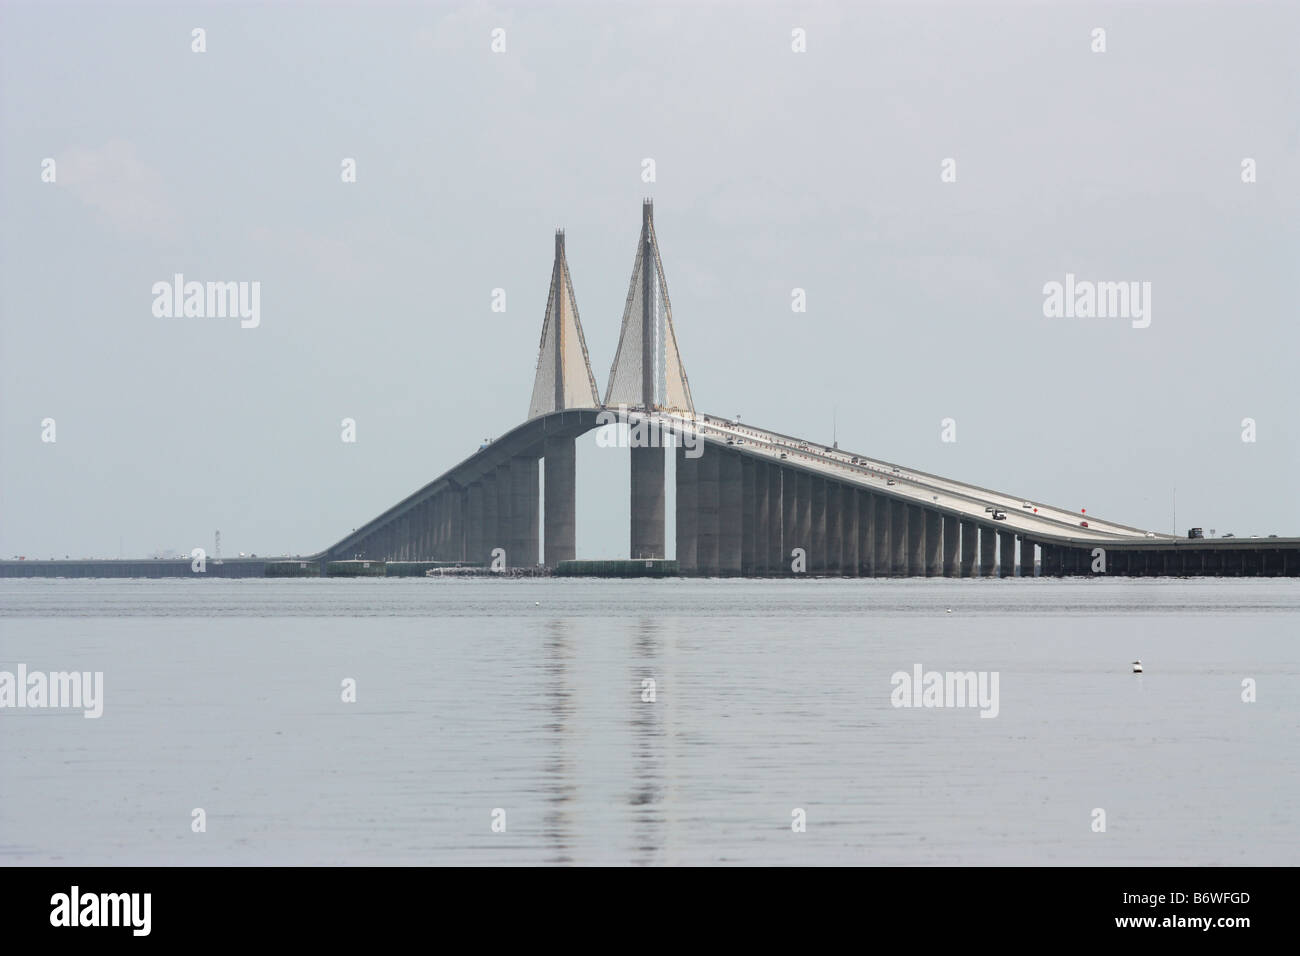 The Sunshine Skyway bridge spanning between Tampa and St Petersburg in Florida Stock Photo